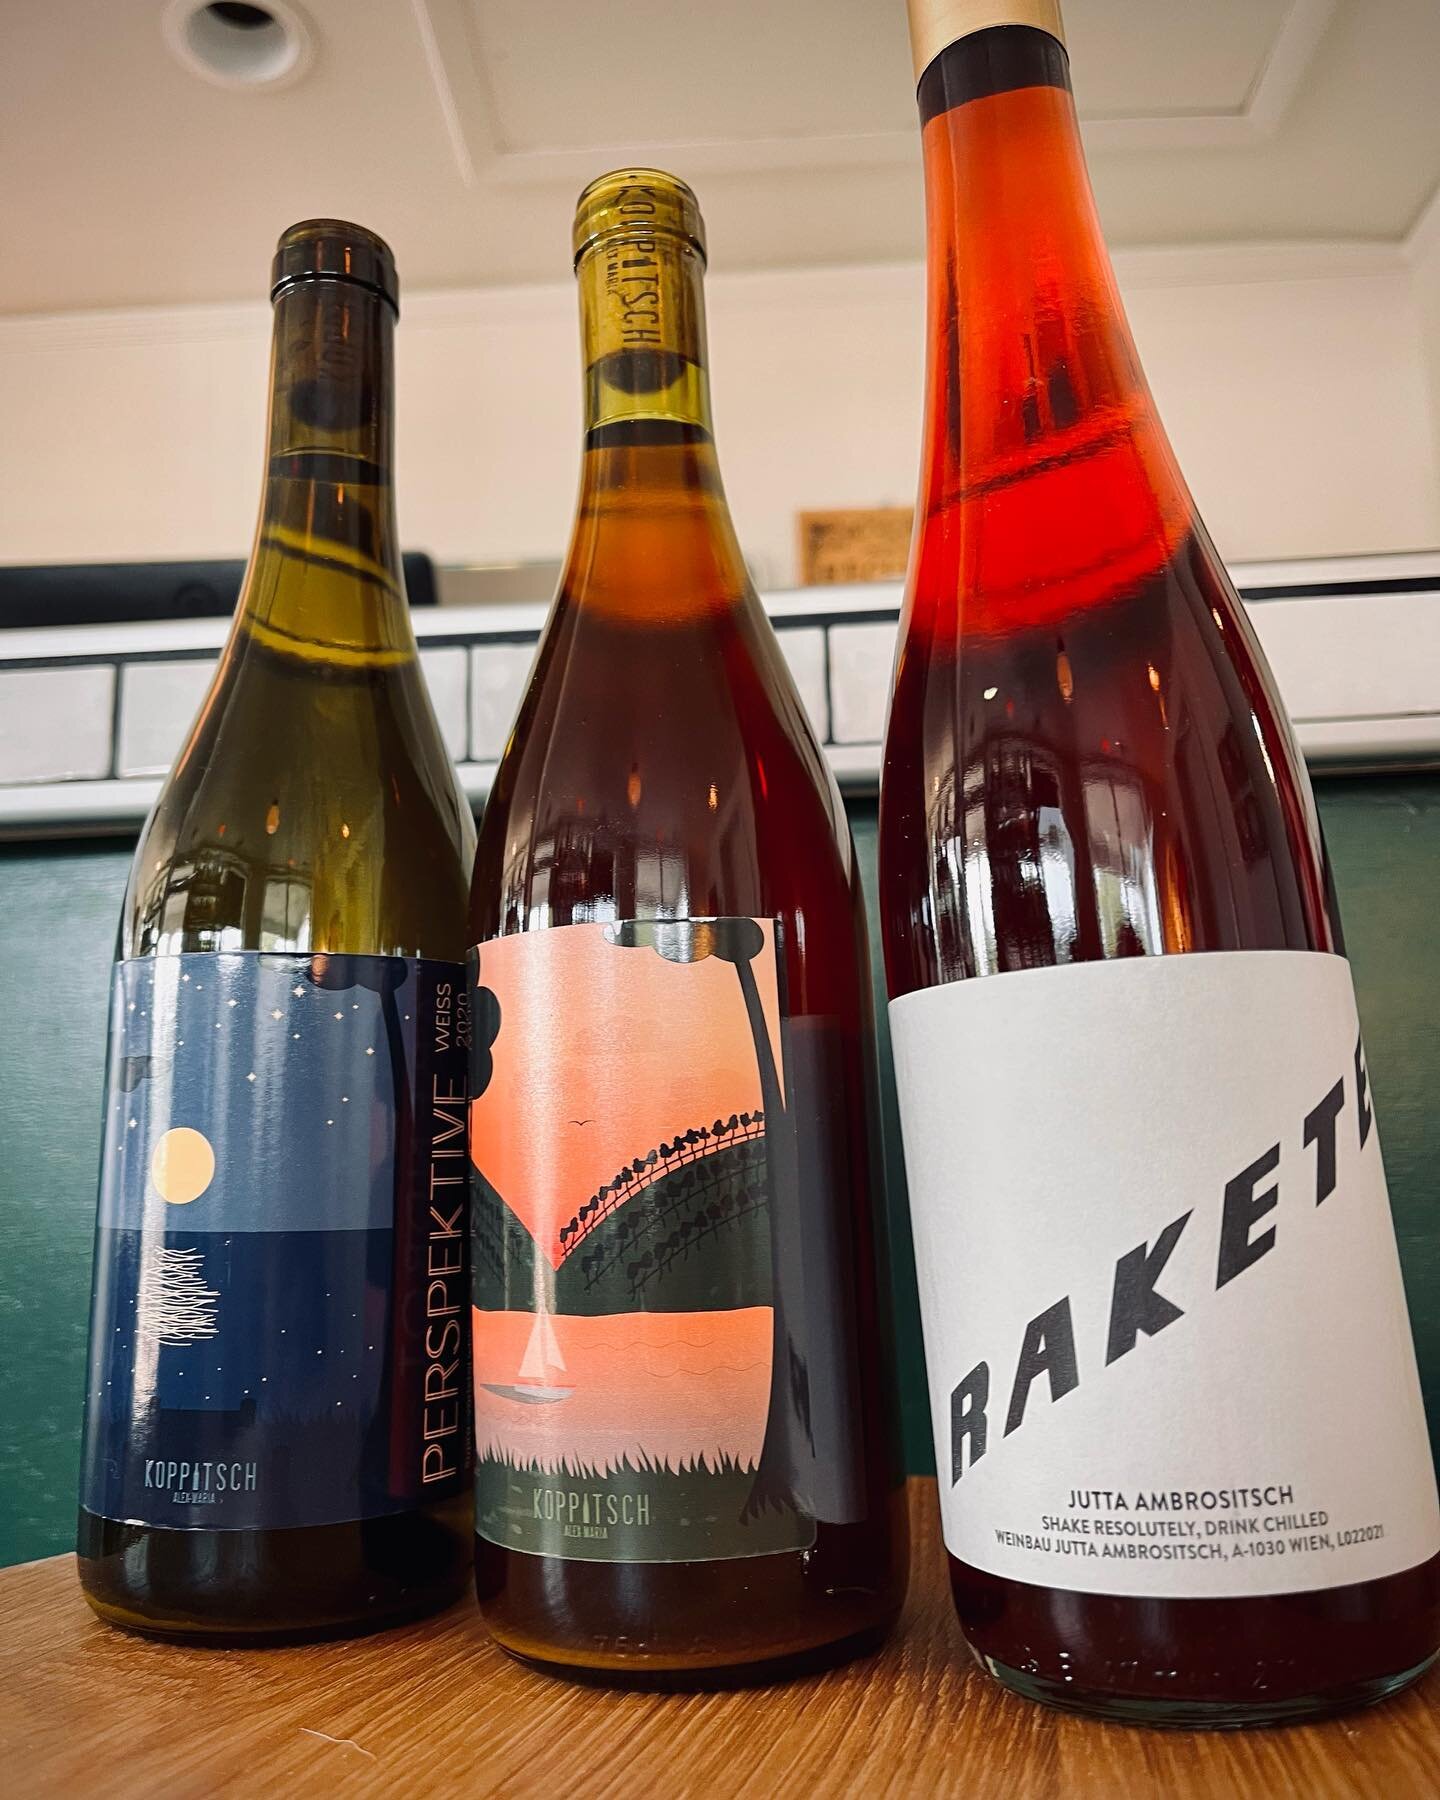 TODAY&rsquo;S TASTING
&amp; TOMORROW&rsquo;S BTG

we&rsquo;re going to Austria 🙌
come by tonight 6-8pm
we have sweet Megan from @__inwine there to guide you through these brilliant, sharp, long, austrian wines. 

TOMORROW
we&rsquo;re pouring french!